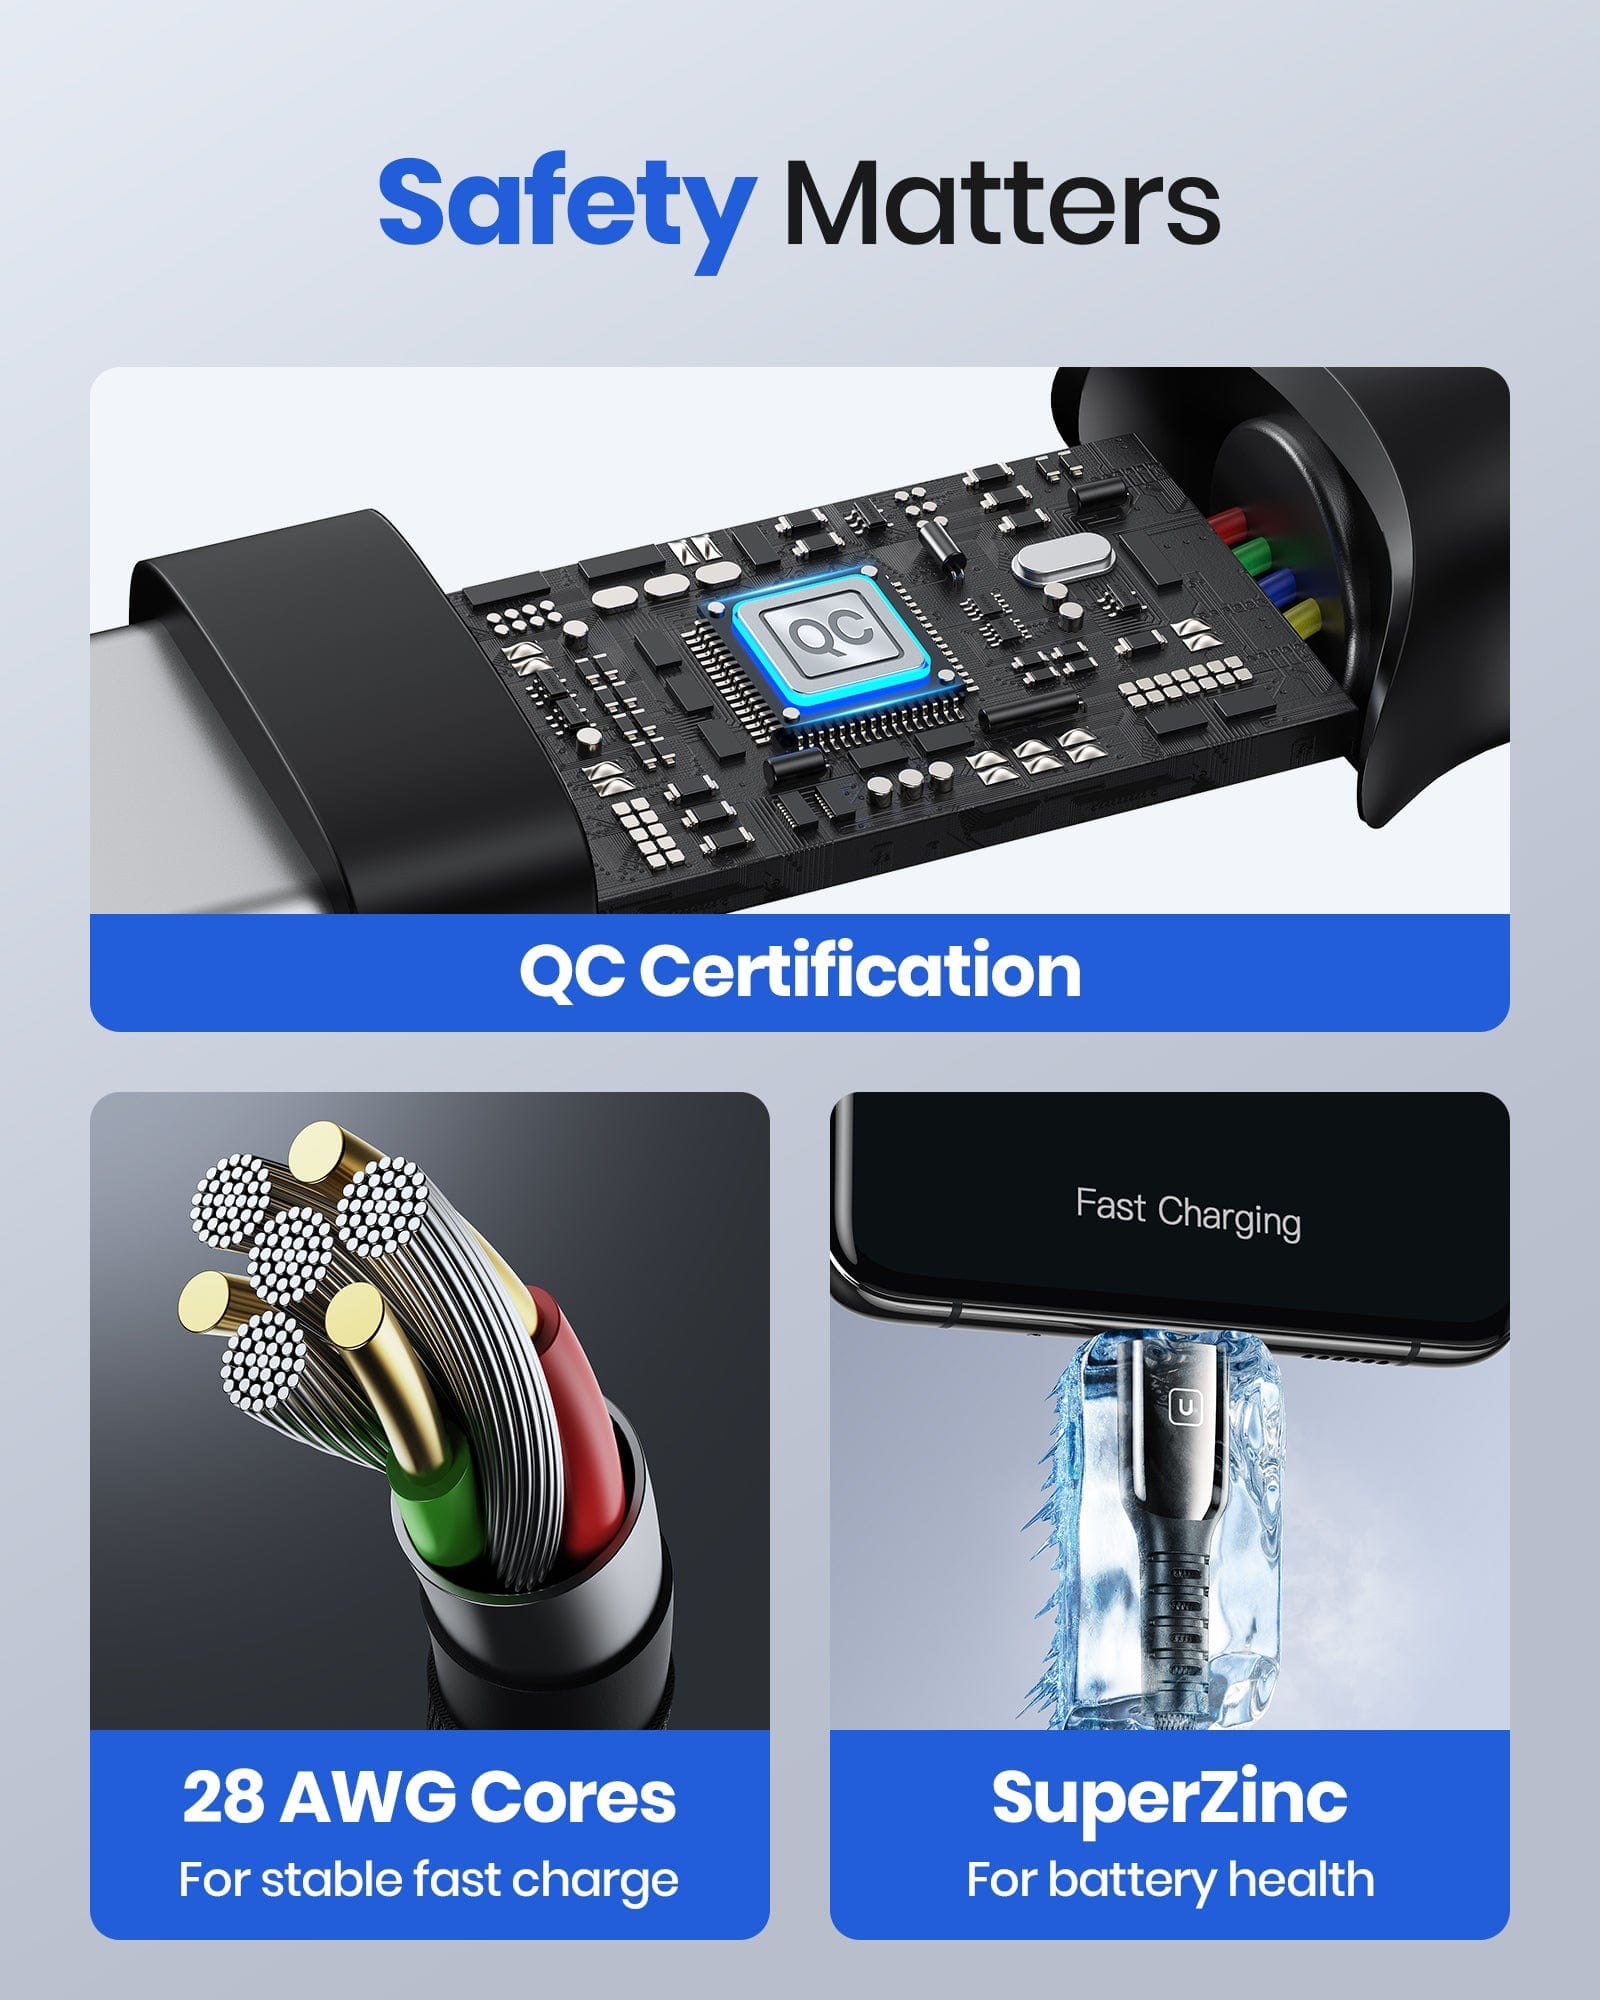 Safety Matters: QC Certification 28 AWG Cores Superzinc For Battery Health